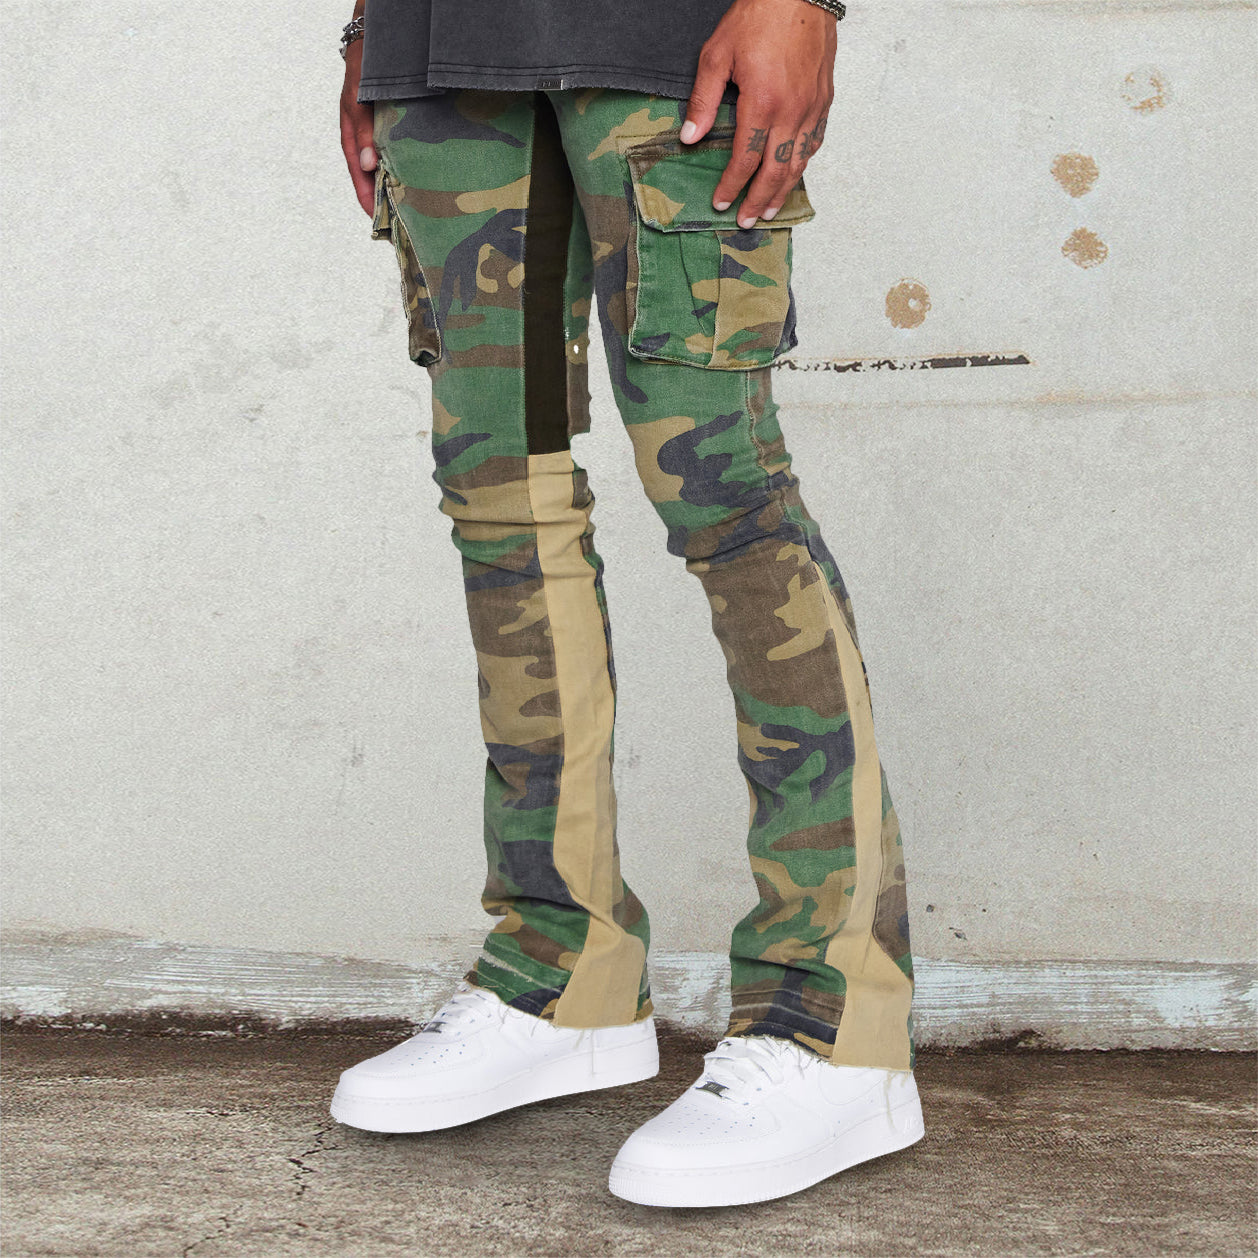 Stylish camouflage overalls stacked jeans